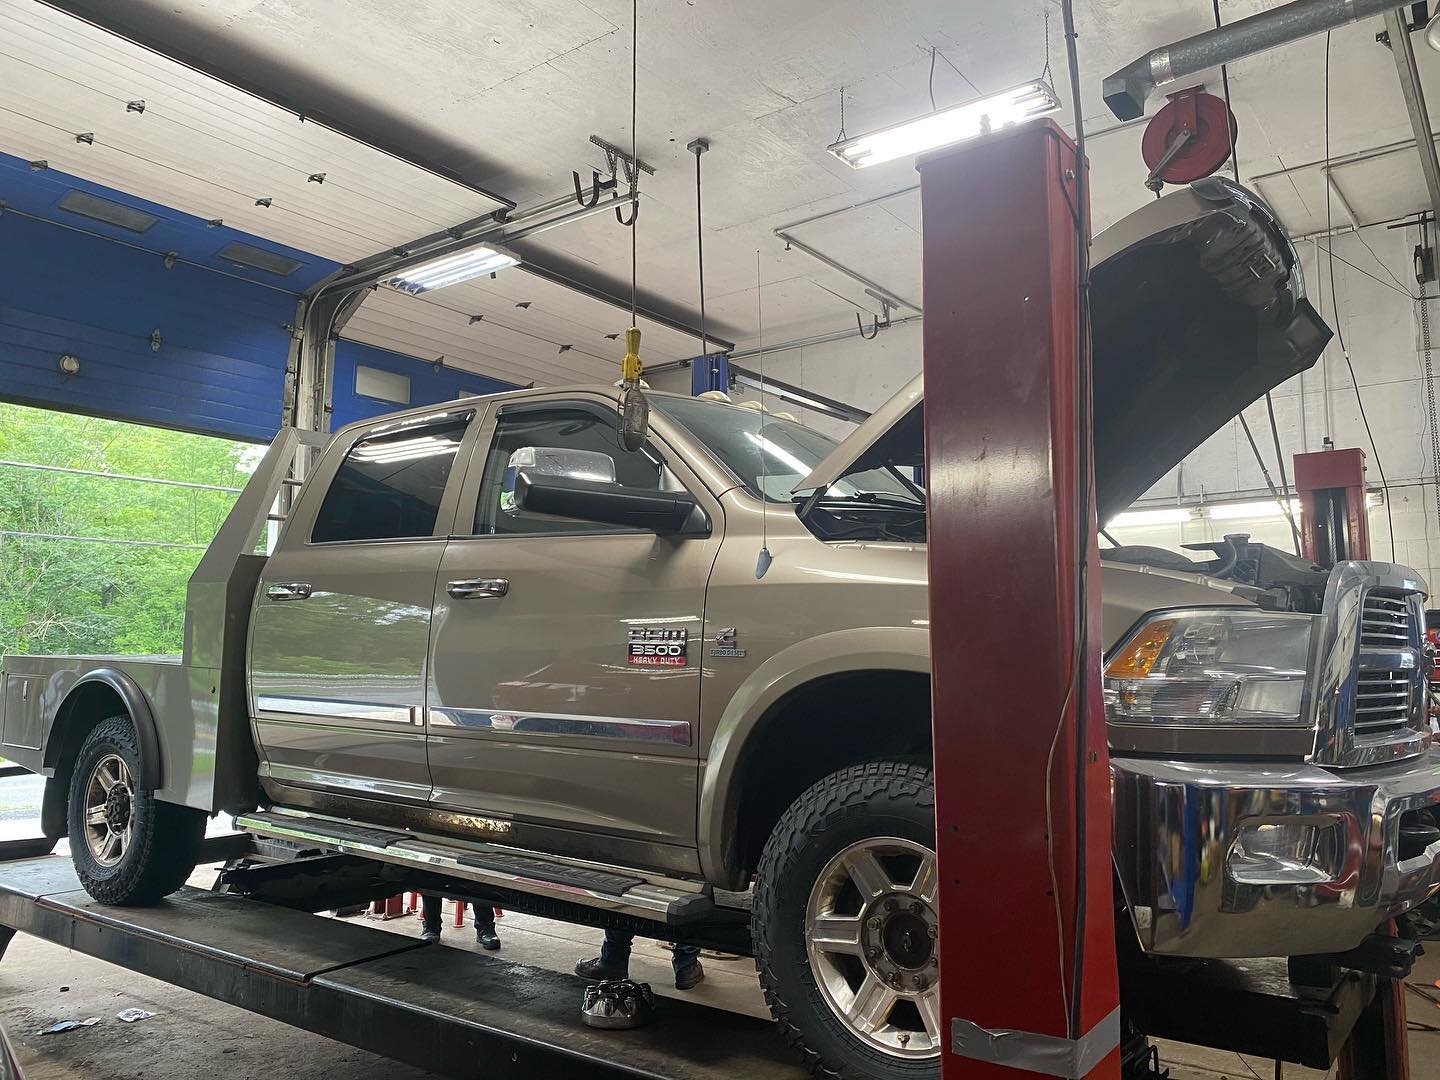 Installed a Firestone airbag system on this Ram 3500 with onboard compressor and  remote controller. 
.
.
.
#airbagsuspension #firestone #ram3500 #appautocare #newtripoli #ram3500dually